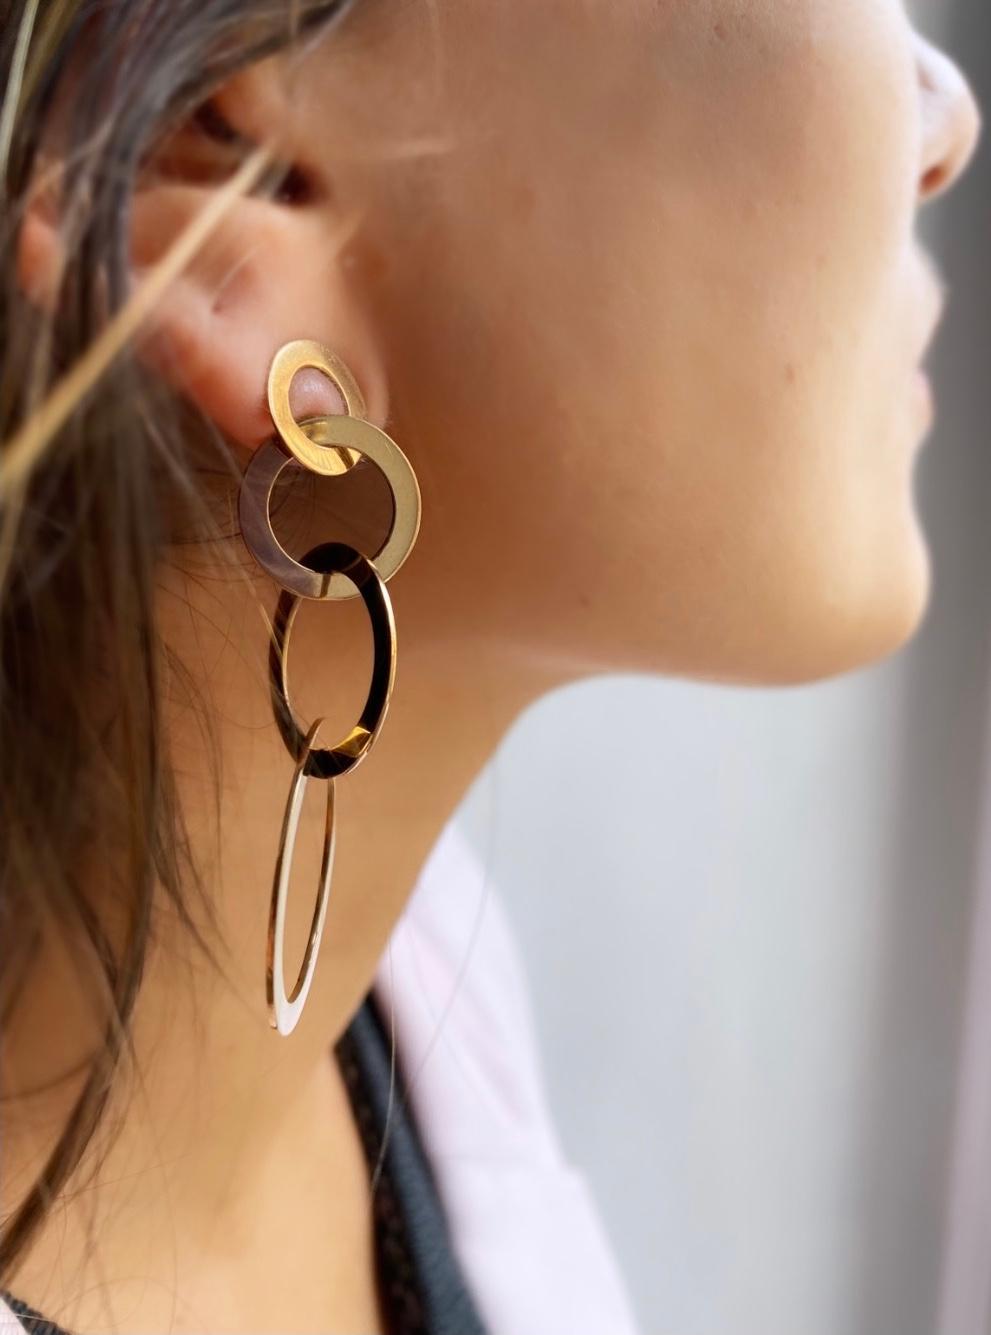 Rossella Ugolini Design Collection, four hoops Handcrafted in Italy from 18k Yellow Gold are chained in a graceful gradation from the smallest on the lobe to the largest, creating a stunningly futuristic and feminine swing. 
The interlocking